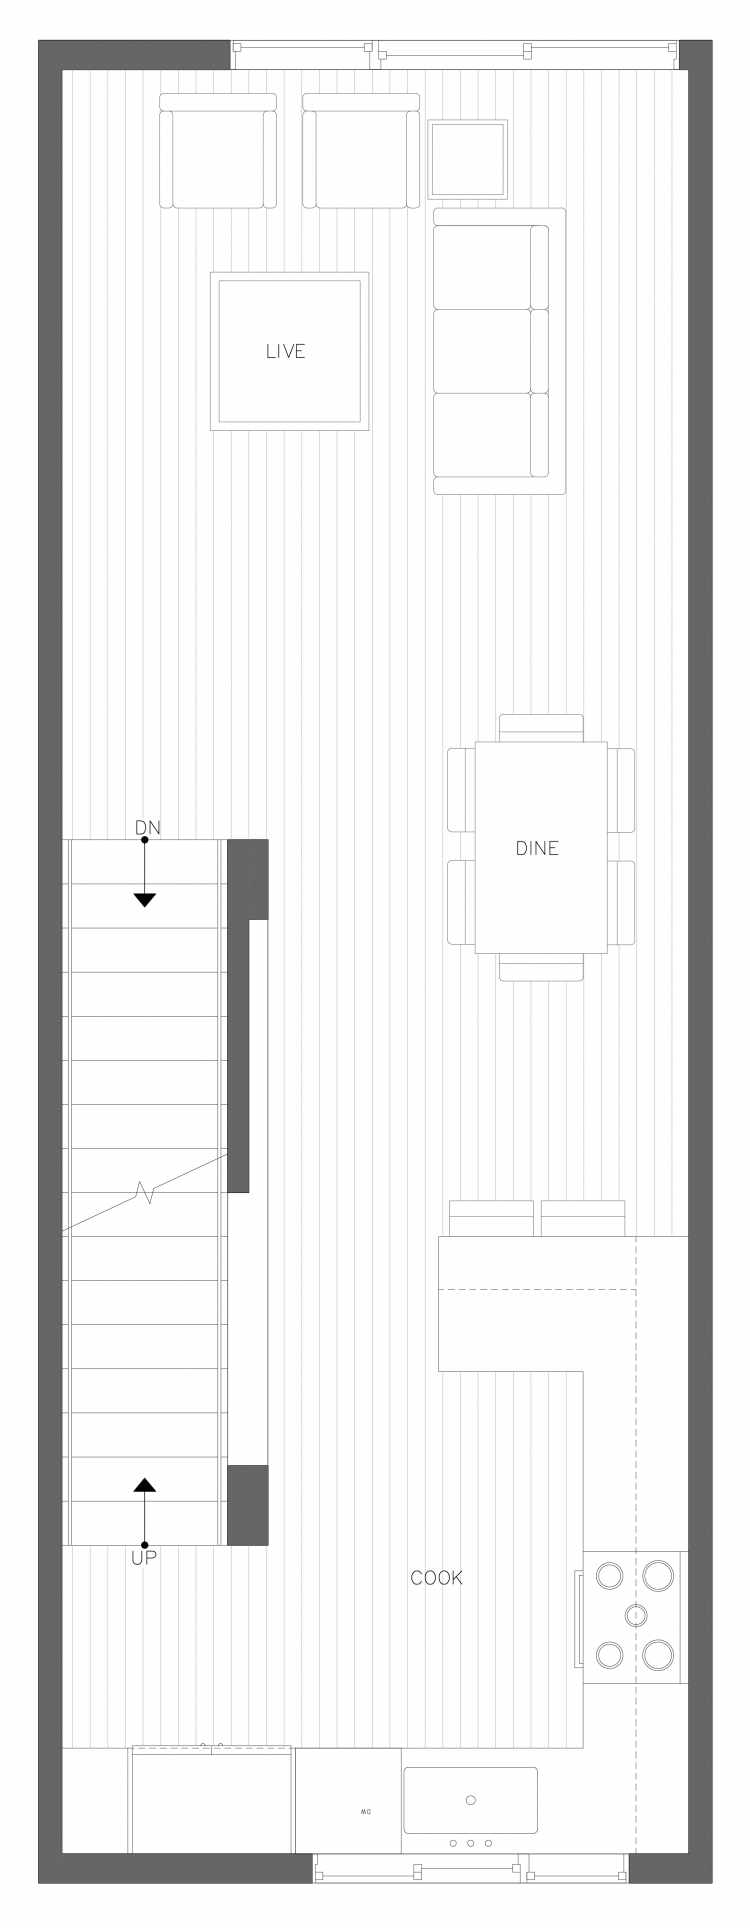 Second Floor Plan of 3406B 15th Ave W, One of the Arlo Townhomes in North Queen Anne